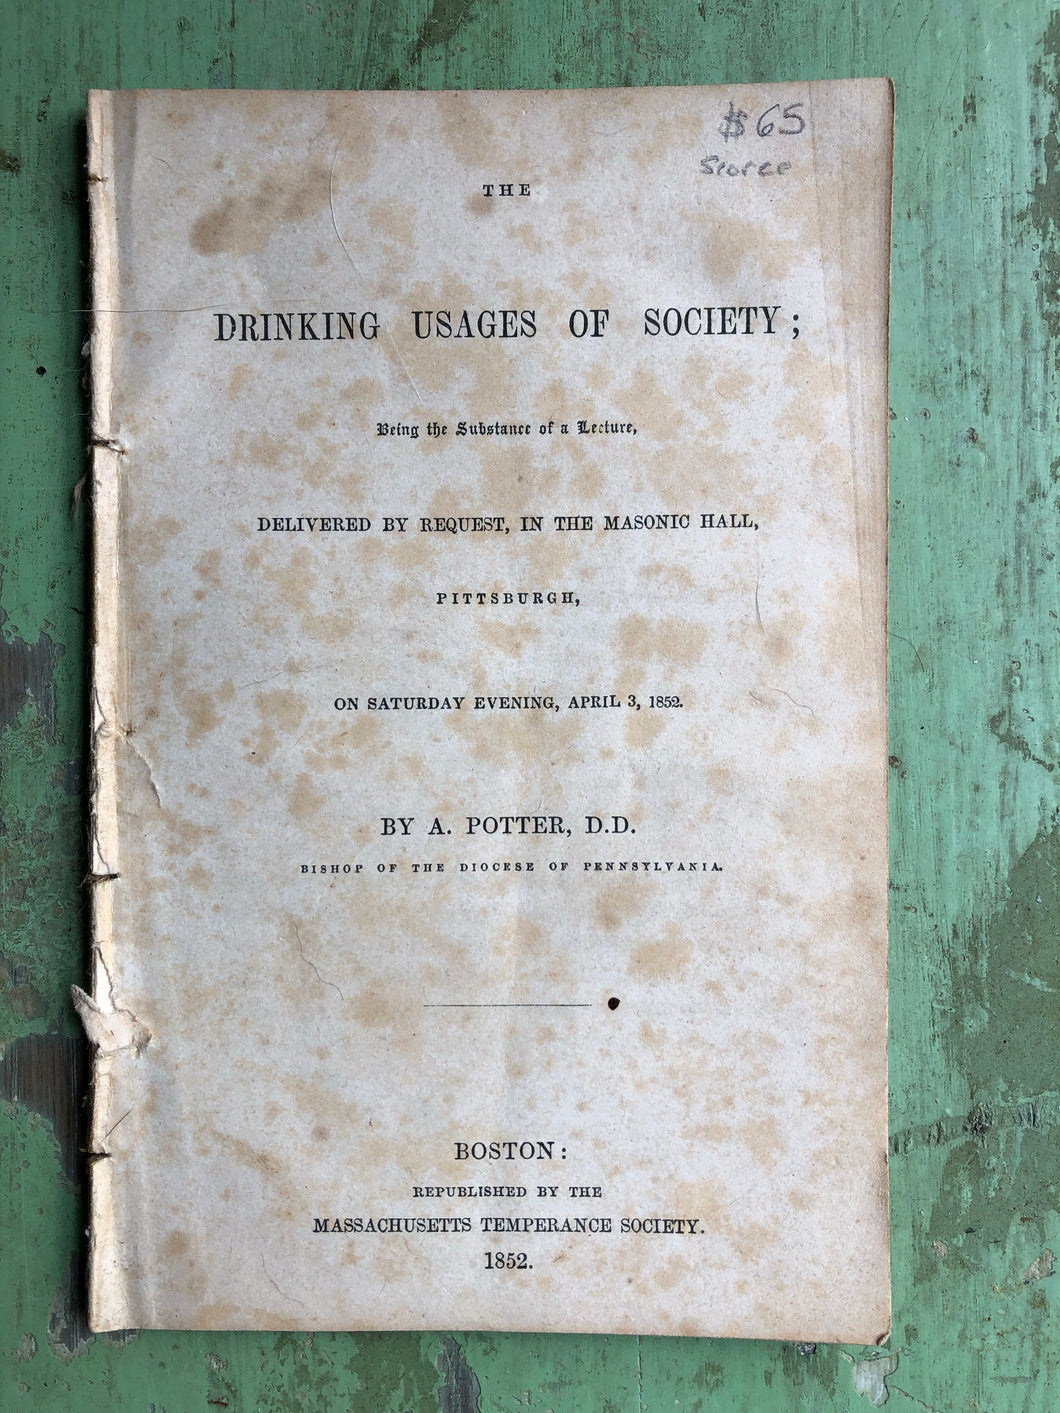 The Drinking Usages of Society by A. Potter